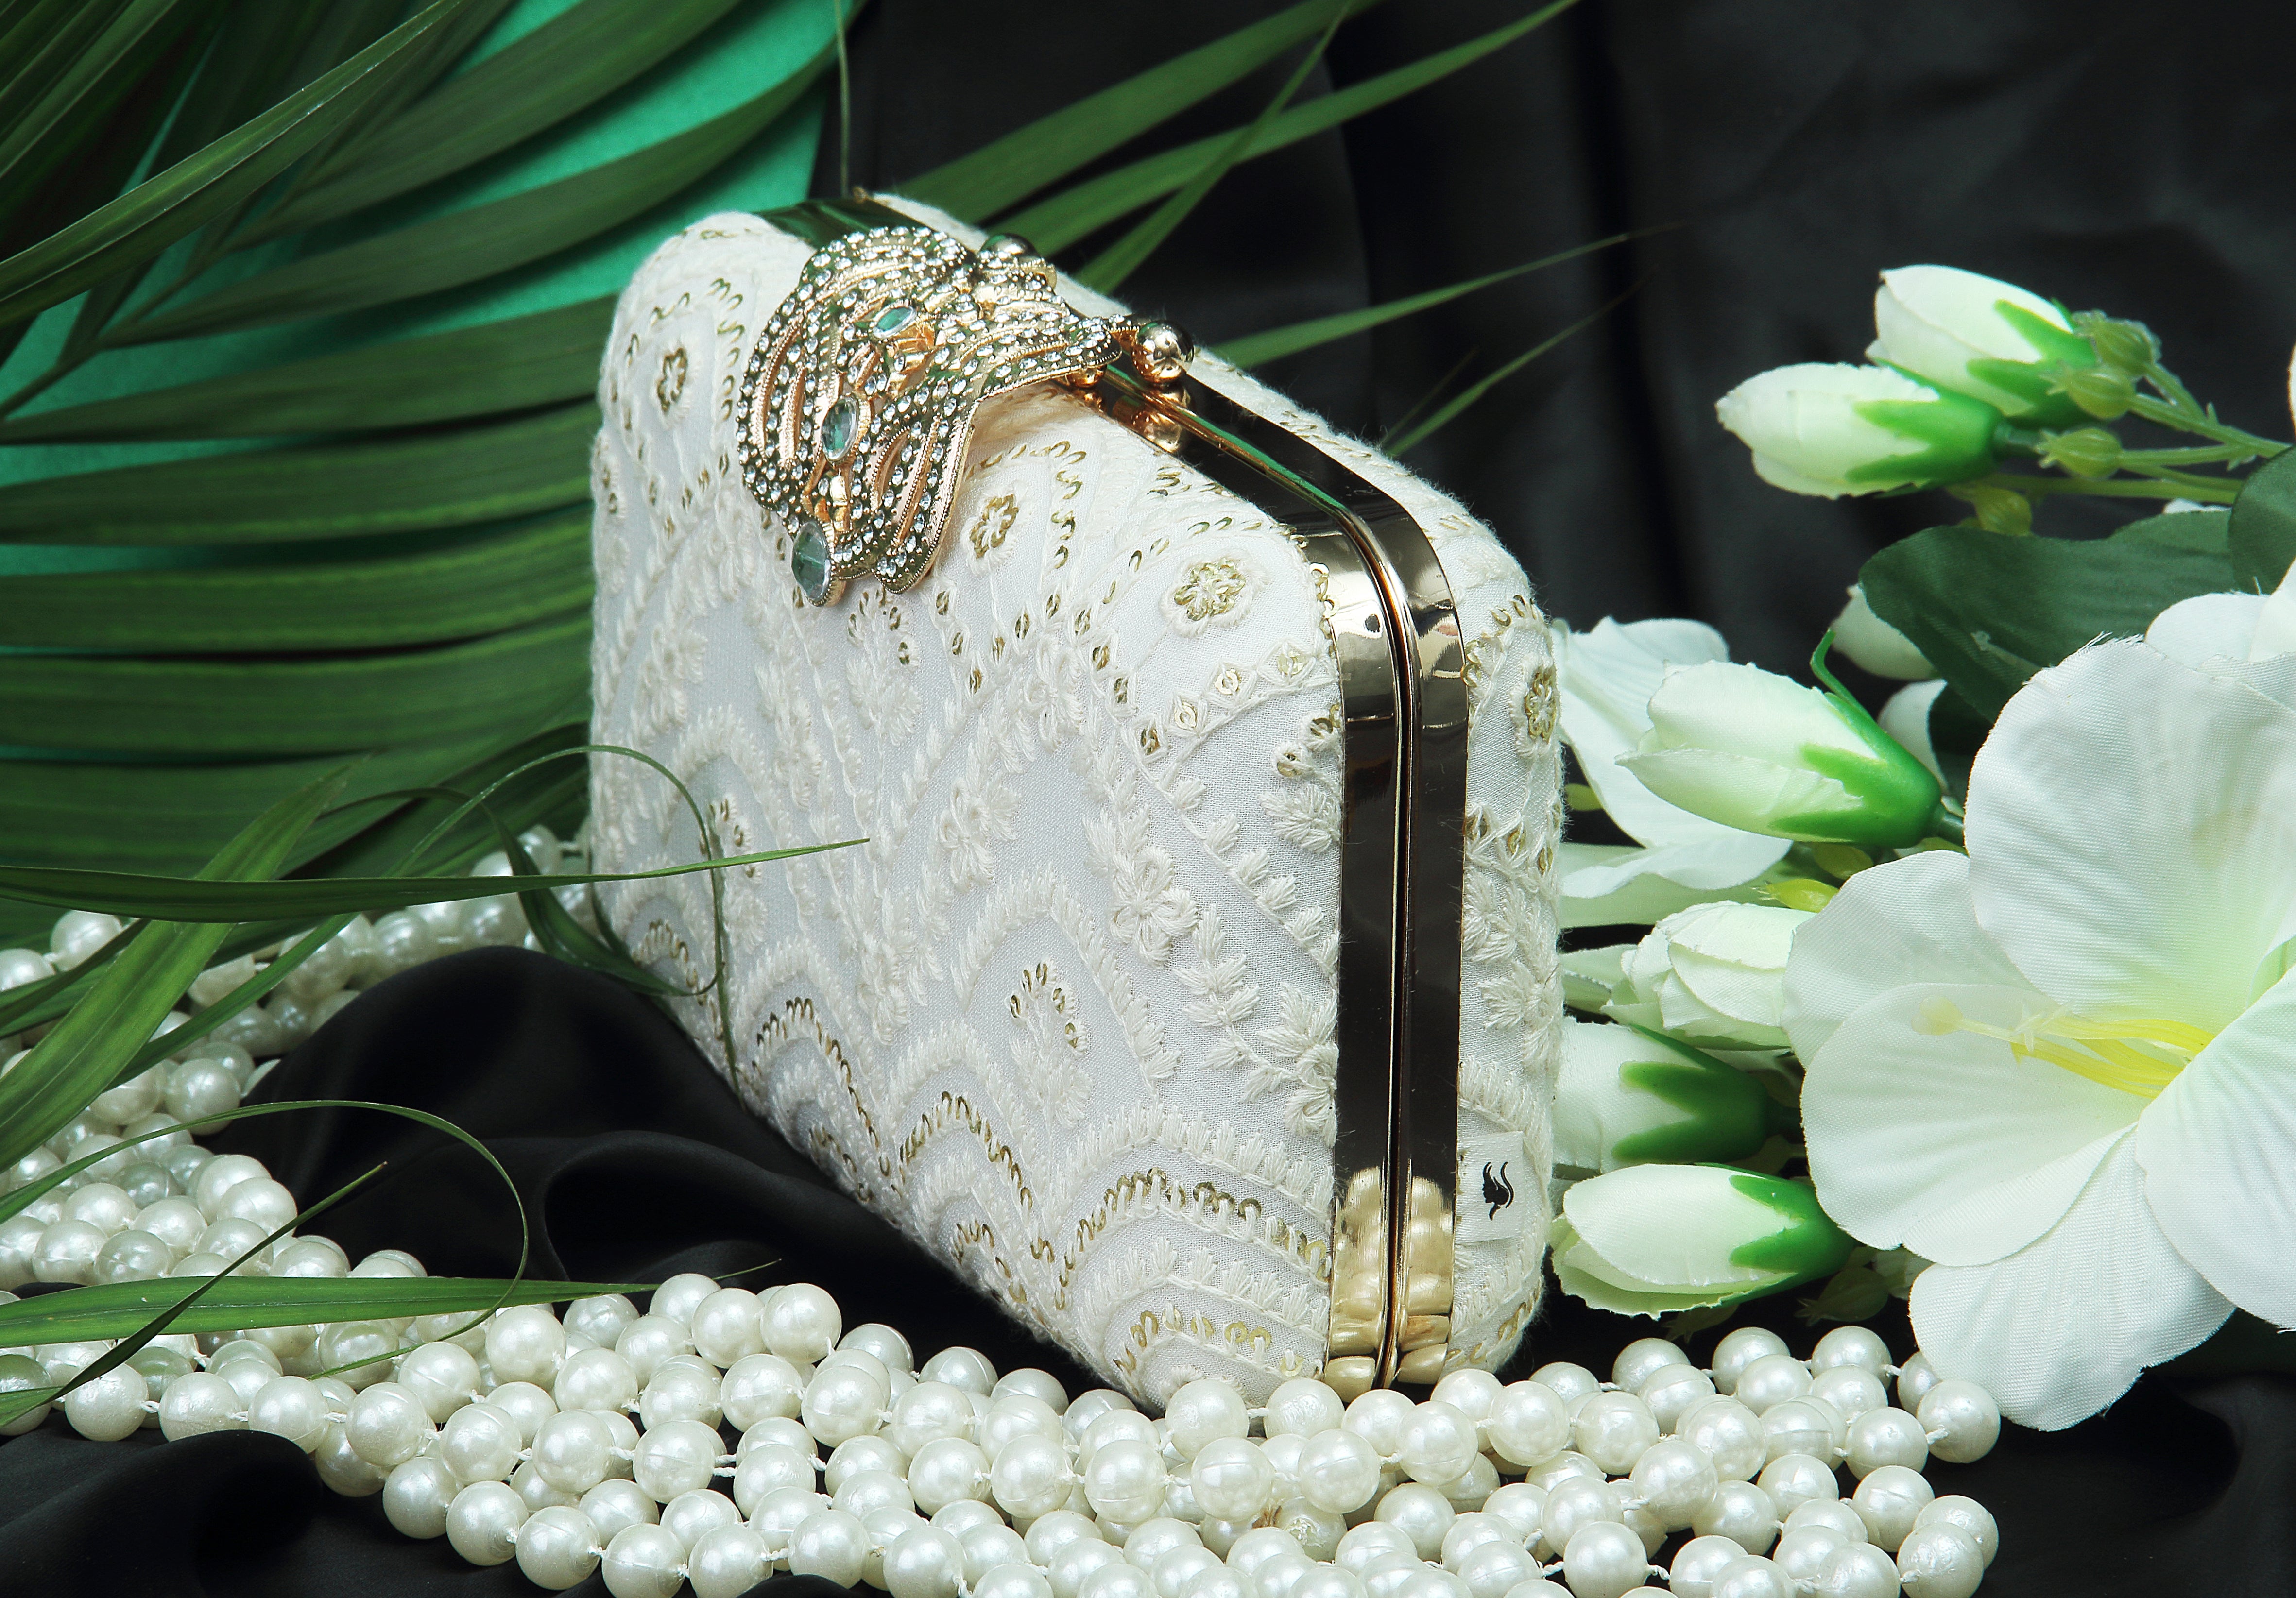 Saadgi embroidered pure white designer clutch bag with sling